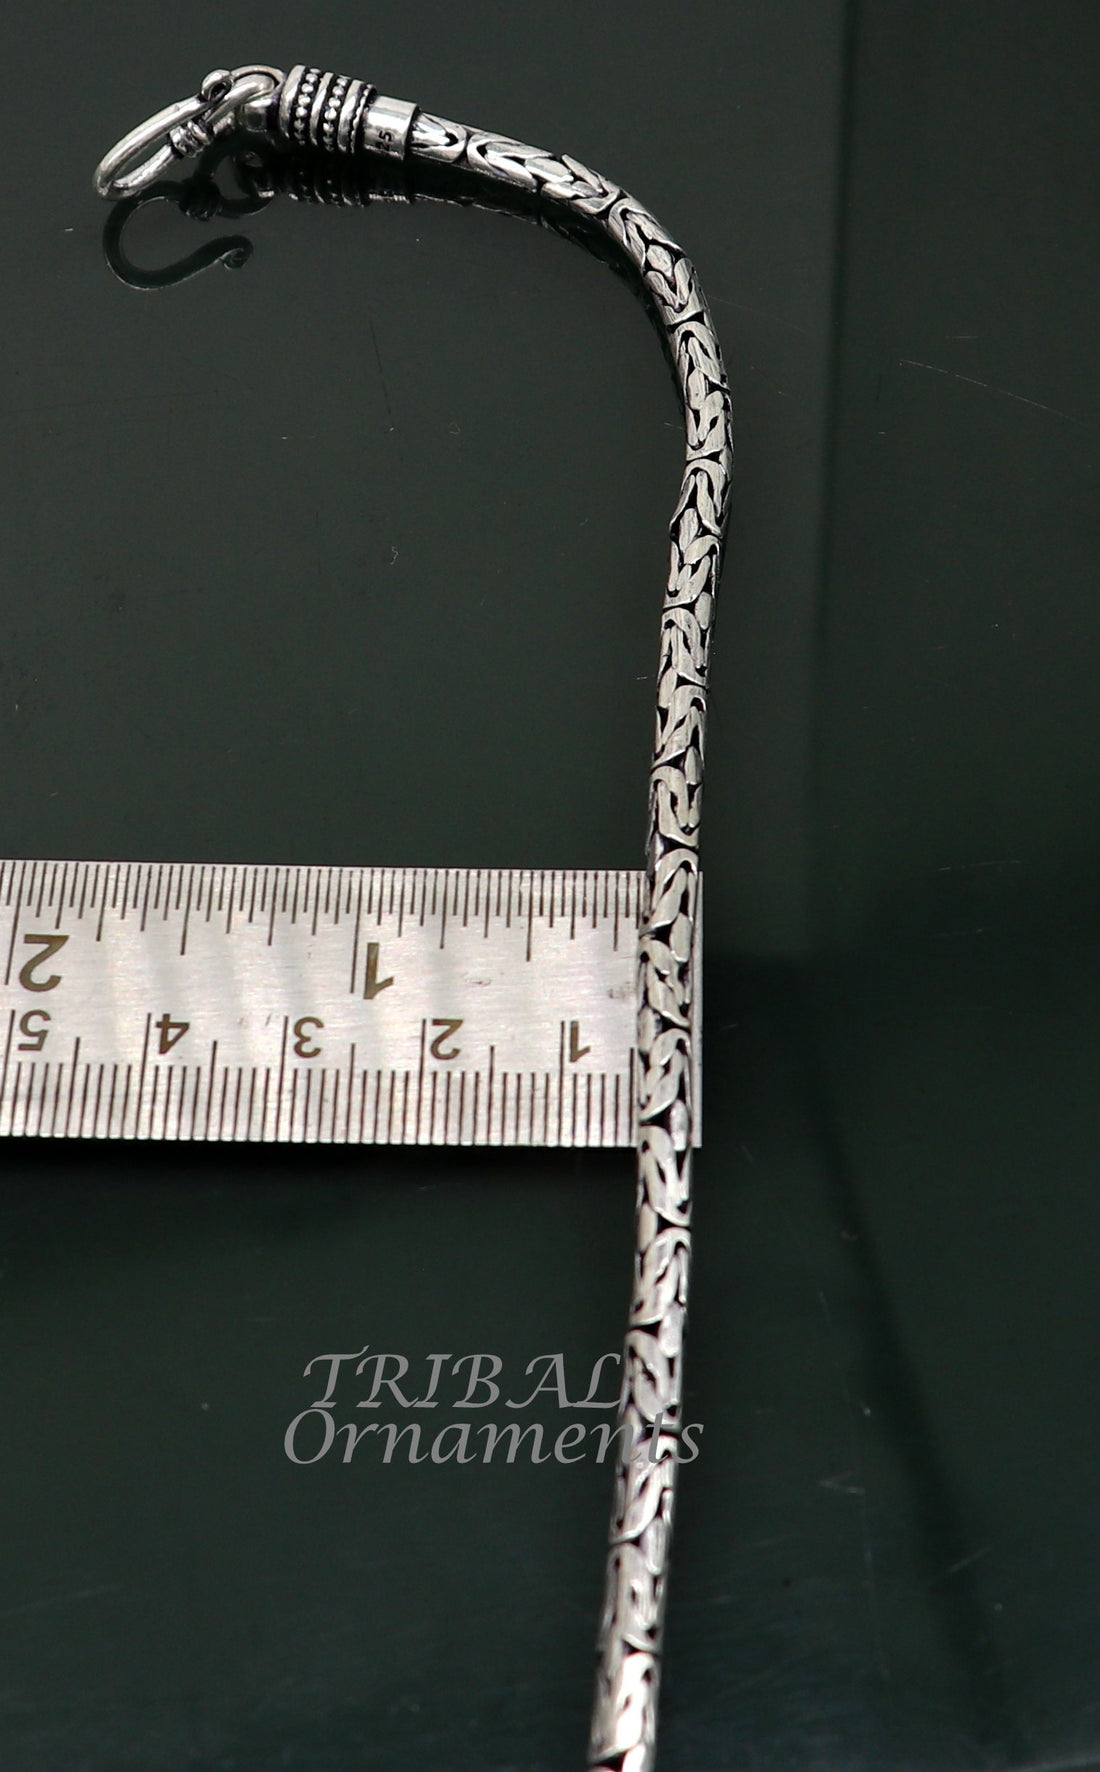 3.5mm 6.5" to 8.5" Unique byzantine design 925 Sterling silver handmade chain bracelet flexible bracelet unisex jewelry from India  sbr429 - TRIBAL ORNAMENTS